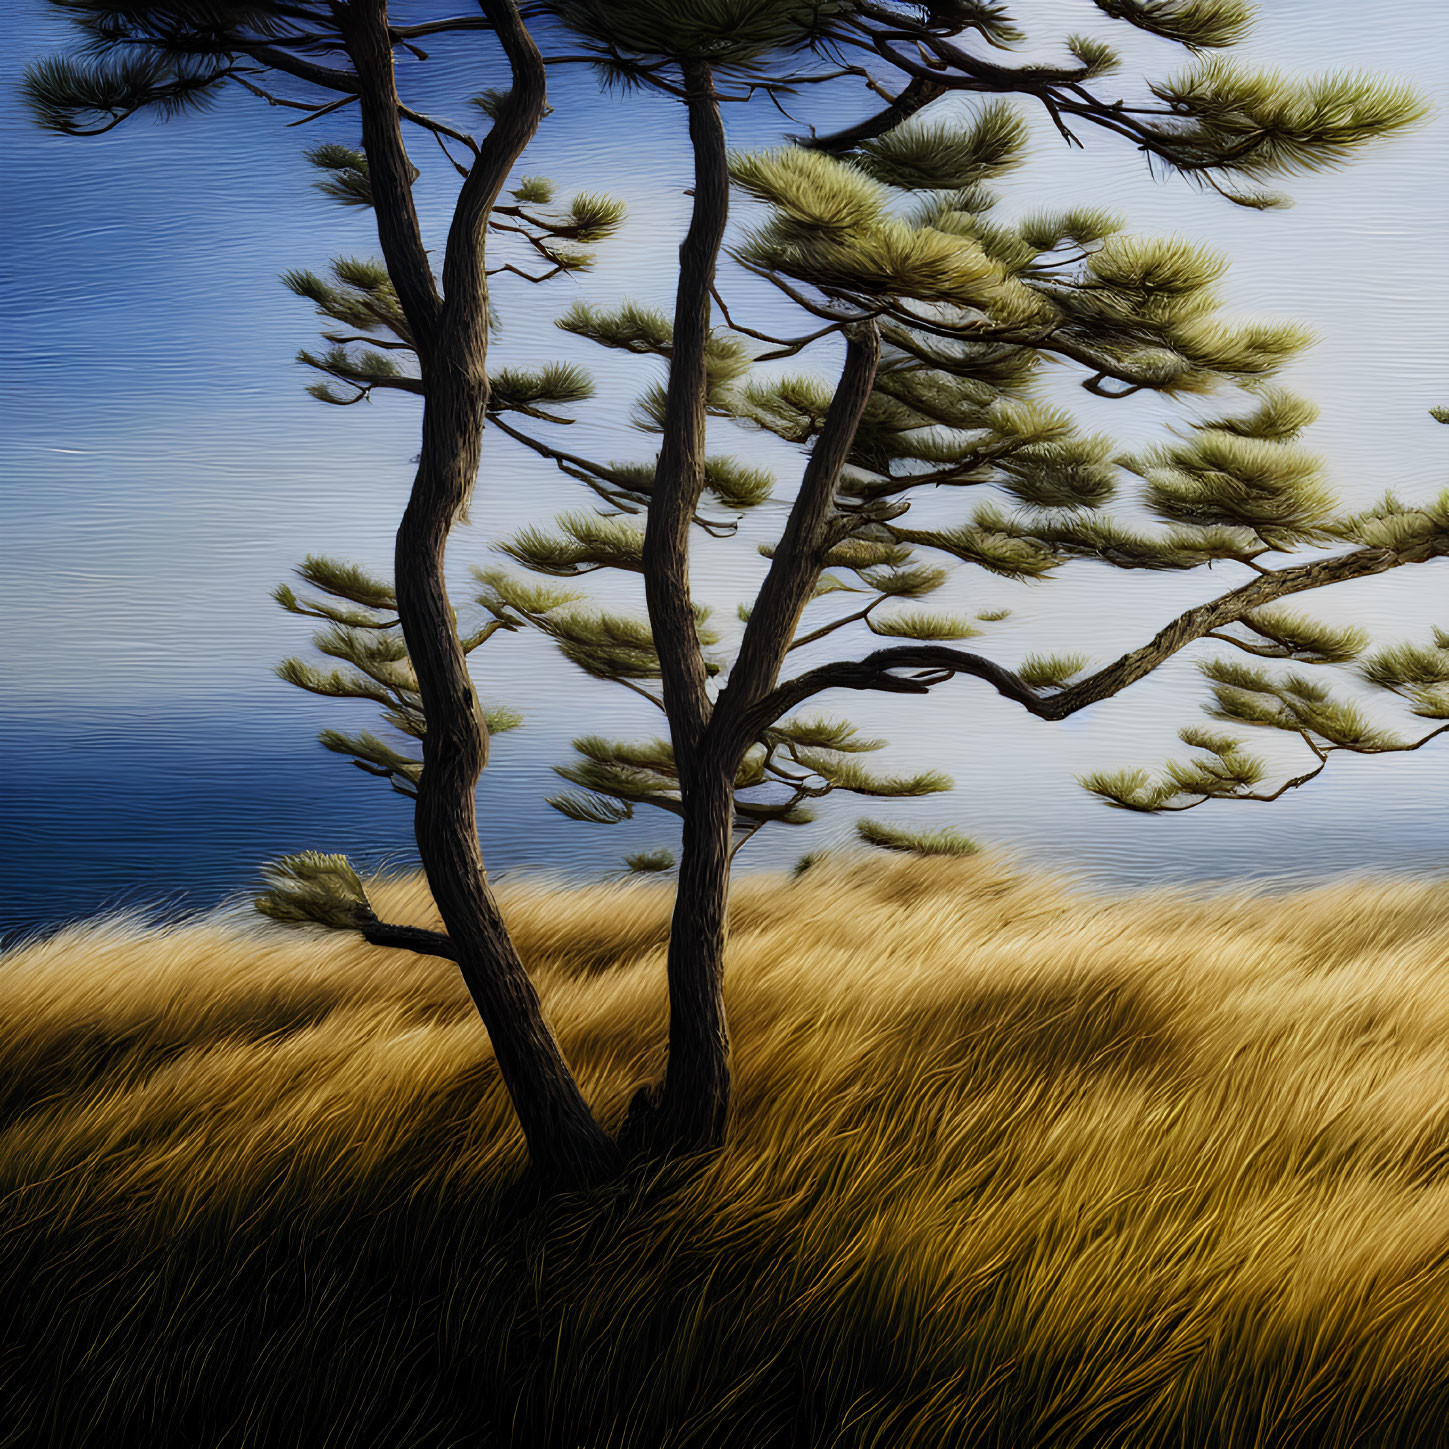 Stylized lone pine tree with thin branches in golden grass field on textured blue backdrop